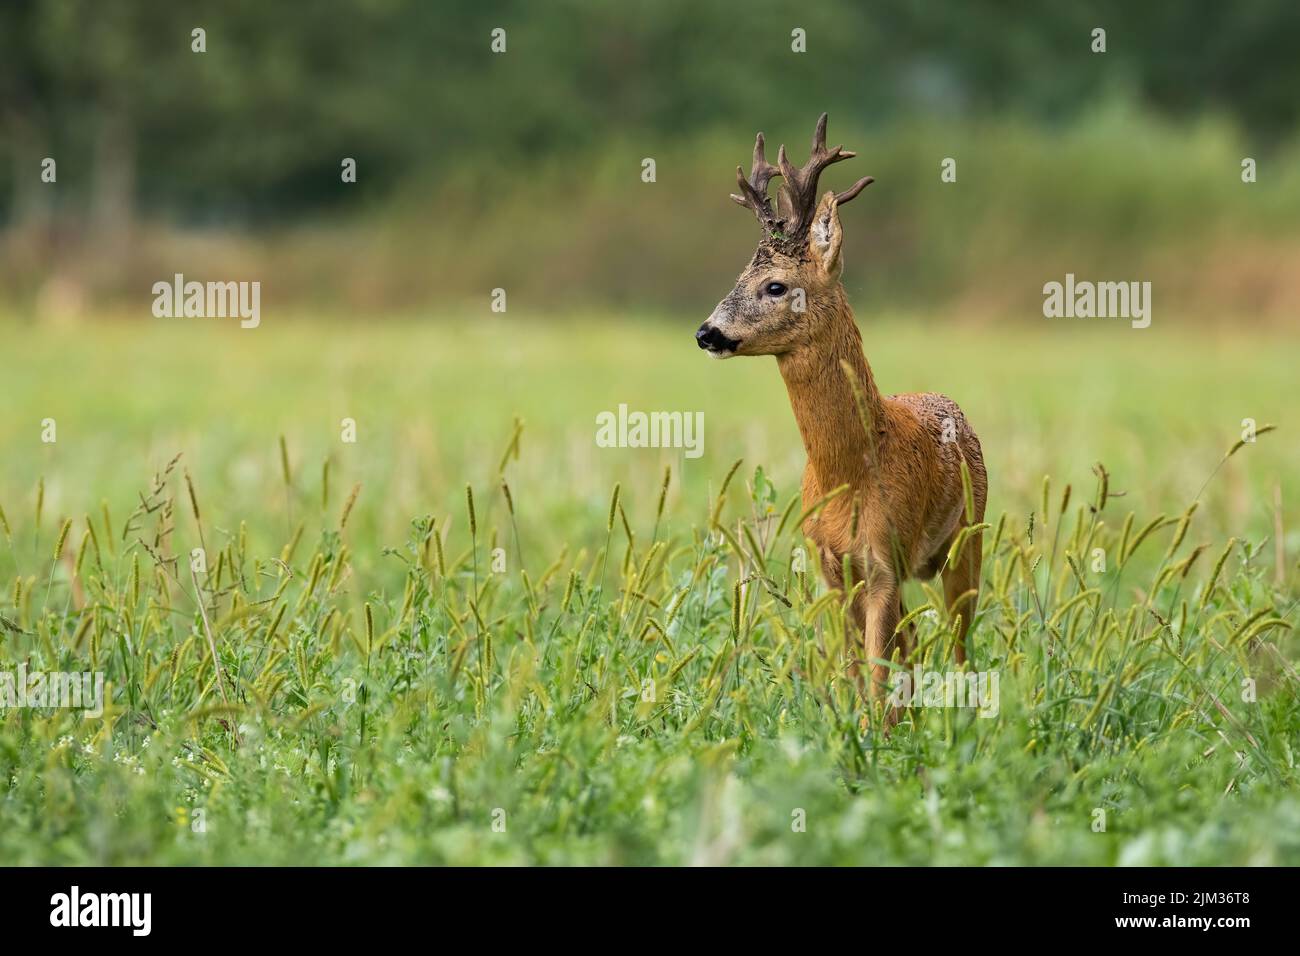 Red deer, cervus elaphus, standing in long grass in summer with copy space. Wild buck looking on meadow with space for text. Antlered mammal observing Stock Photo